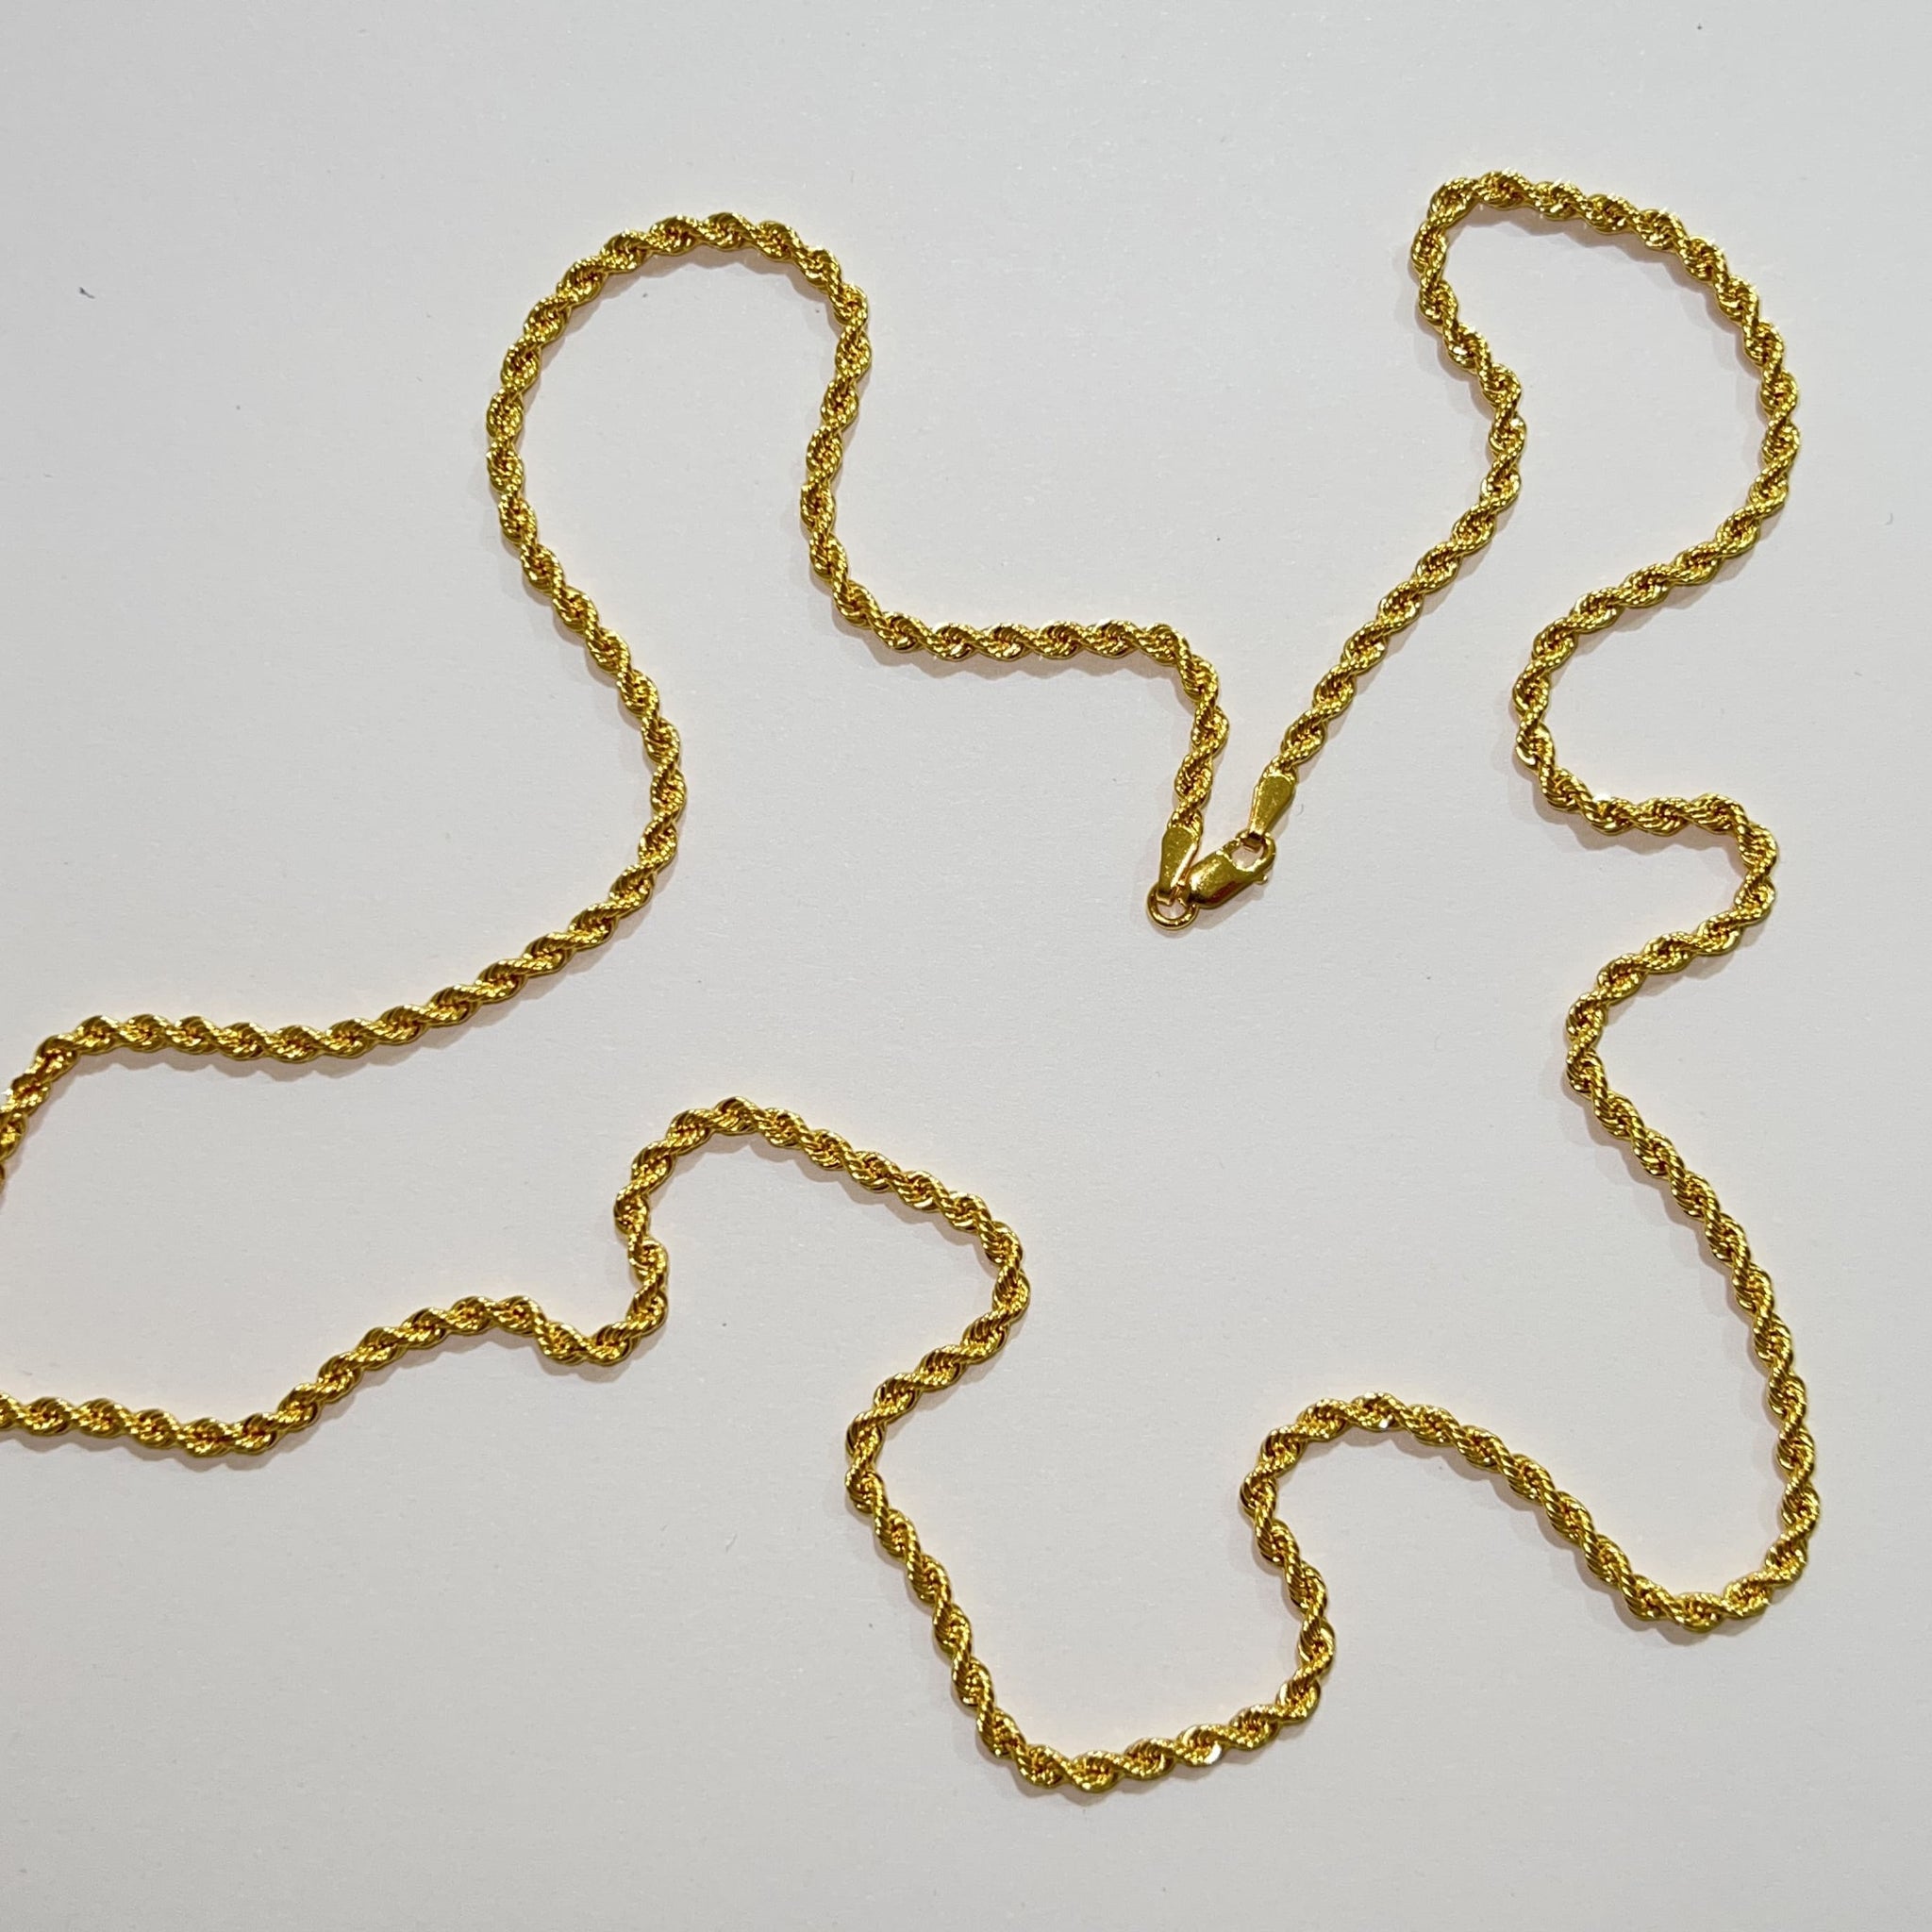 Rope Chain - 14 carat gold - 2.7mm / 65cm